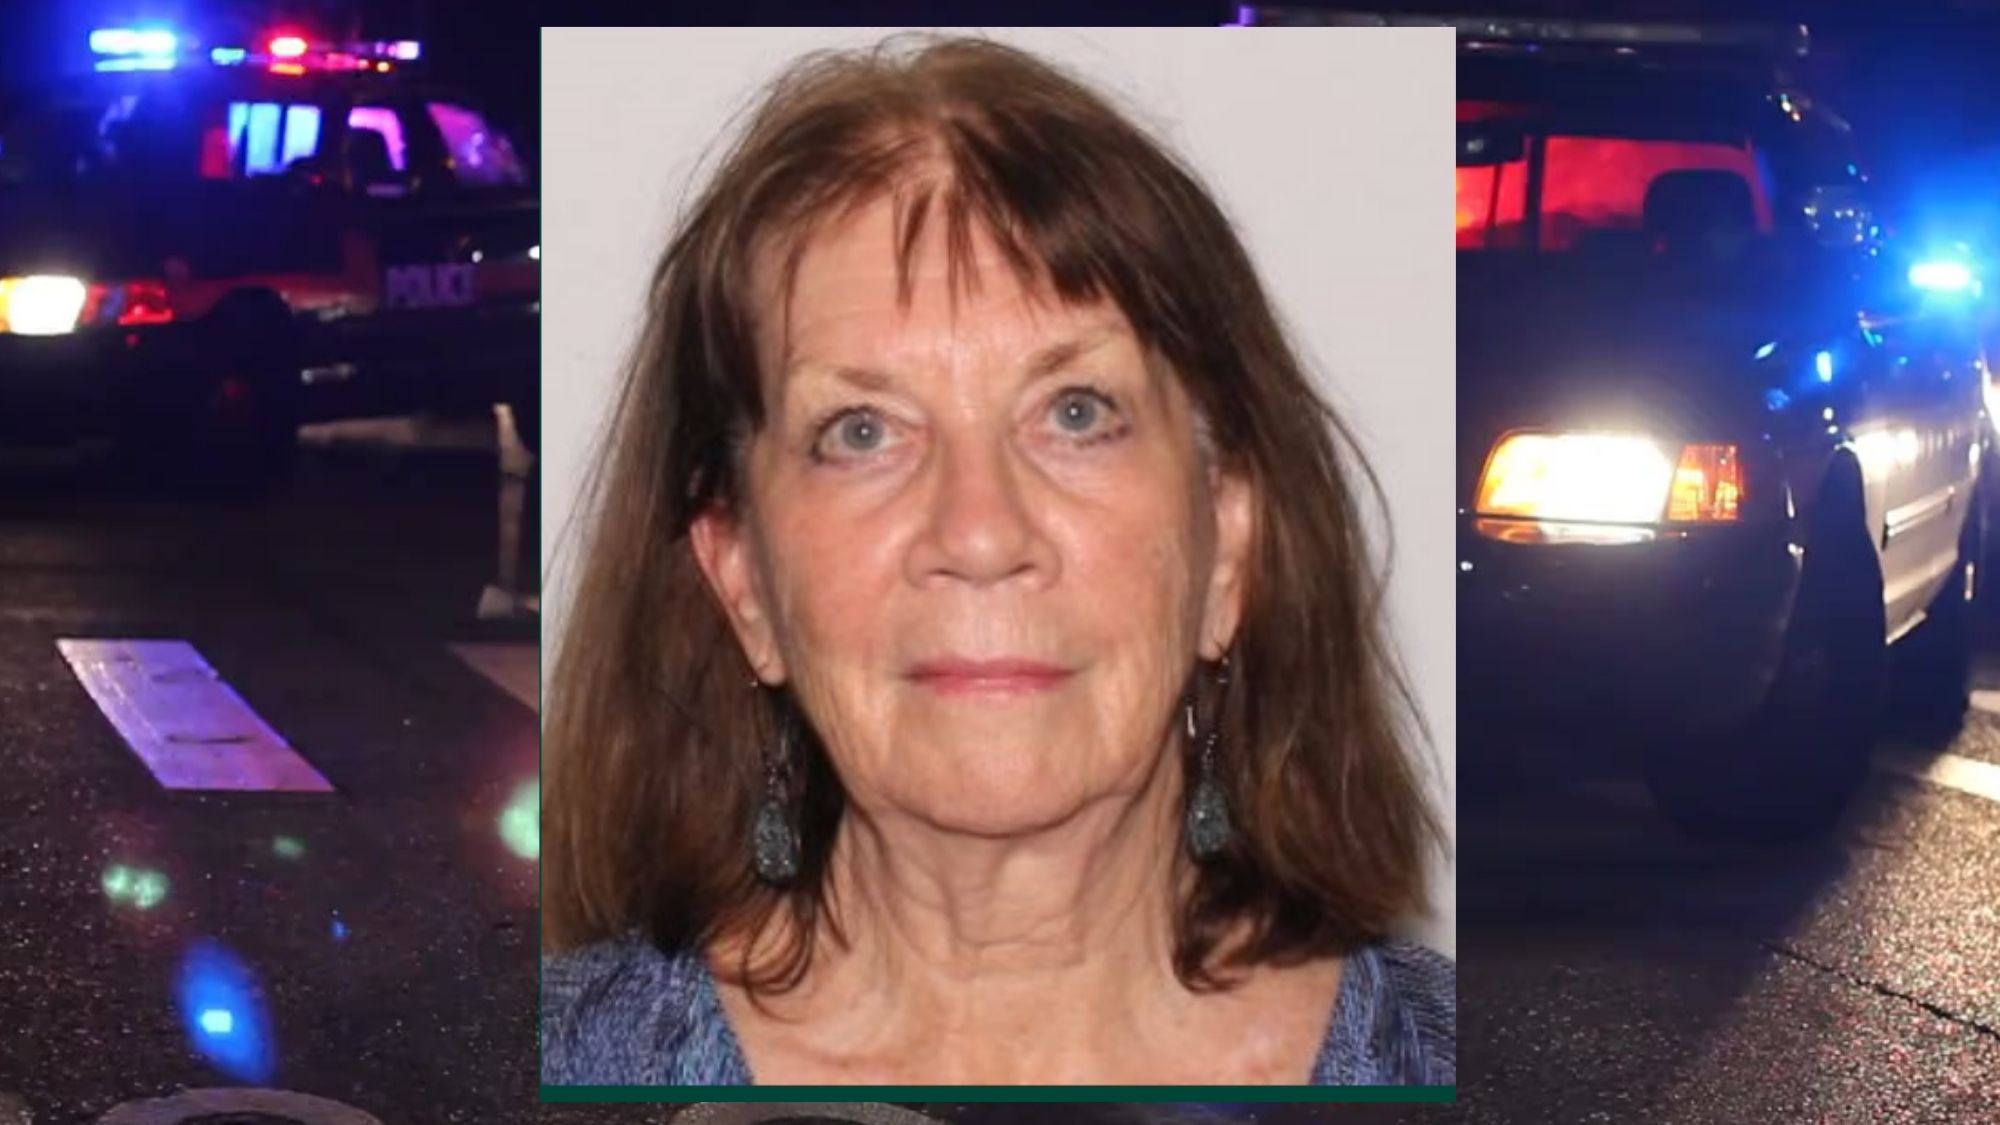 Detectives Search for Missing 81-Year-Old Woman Last Seen in Tamarac